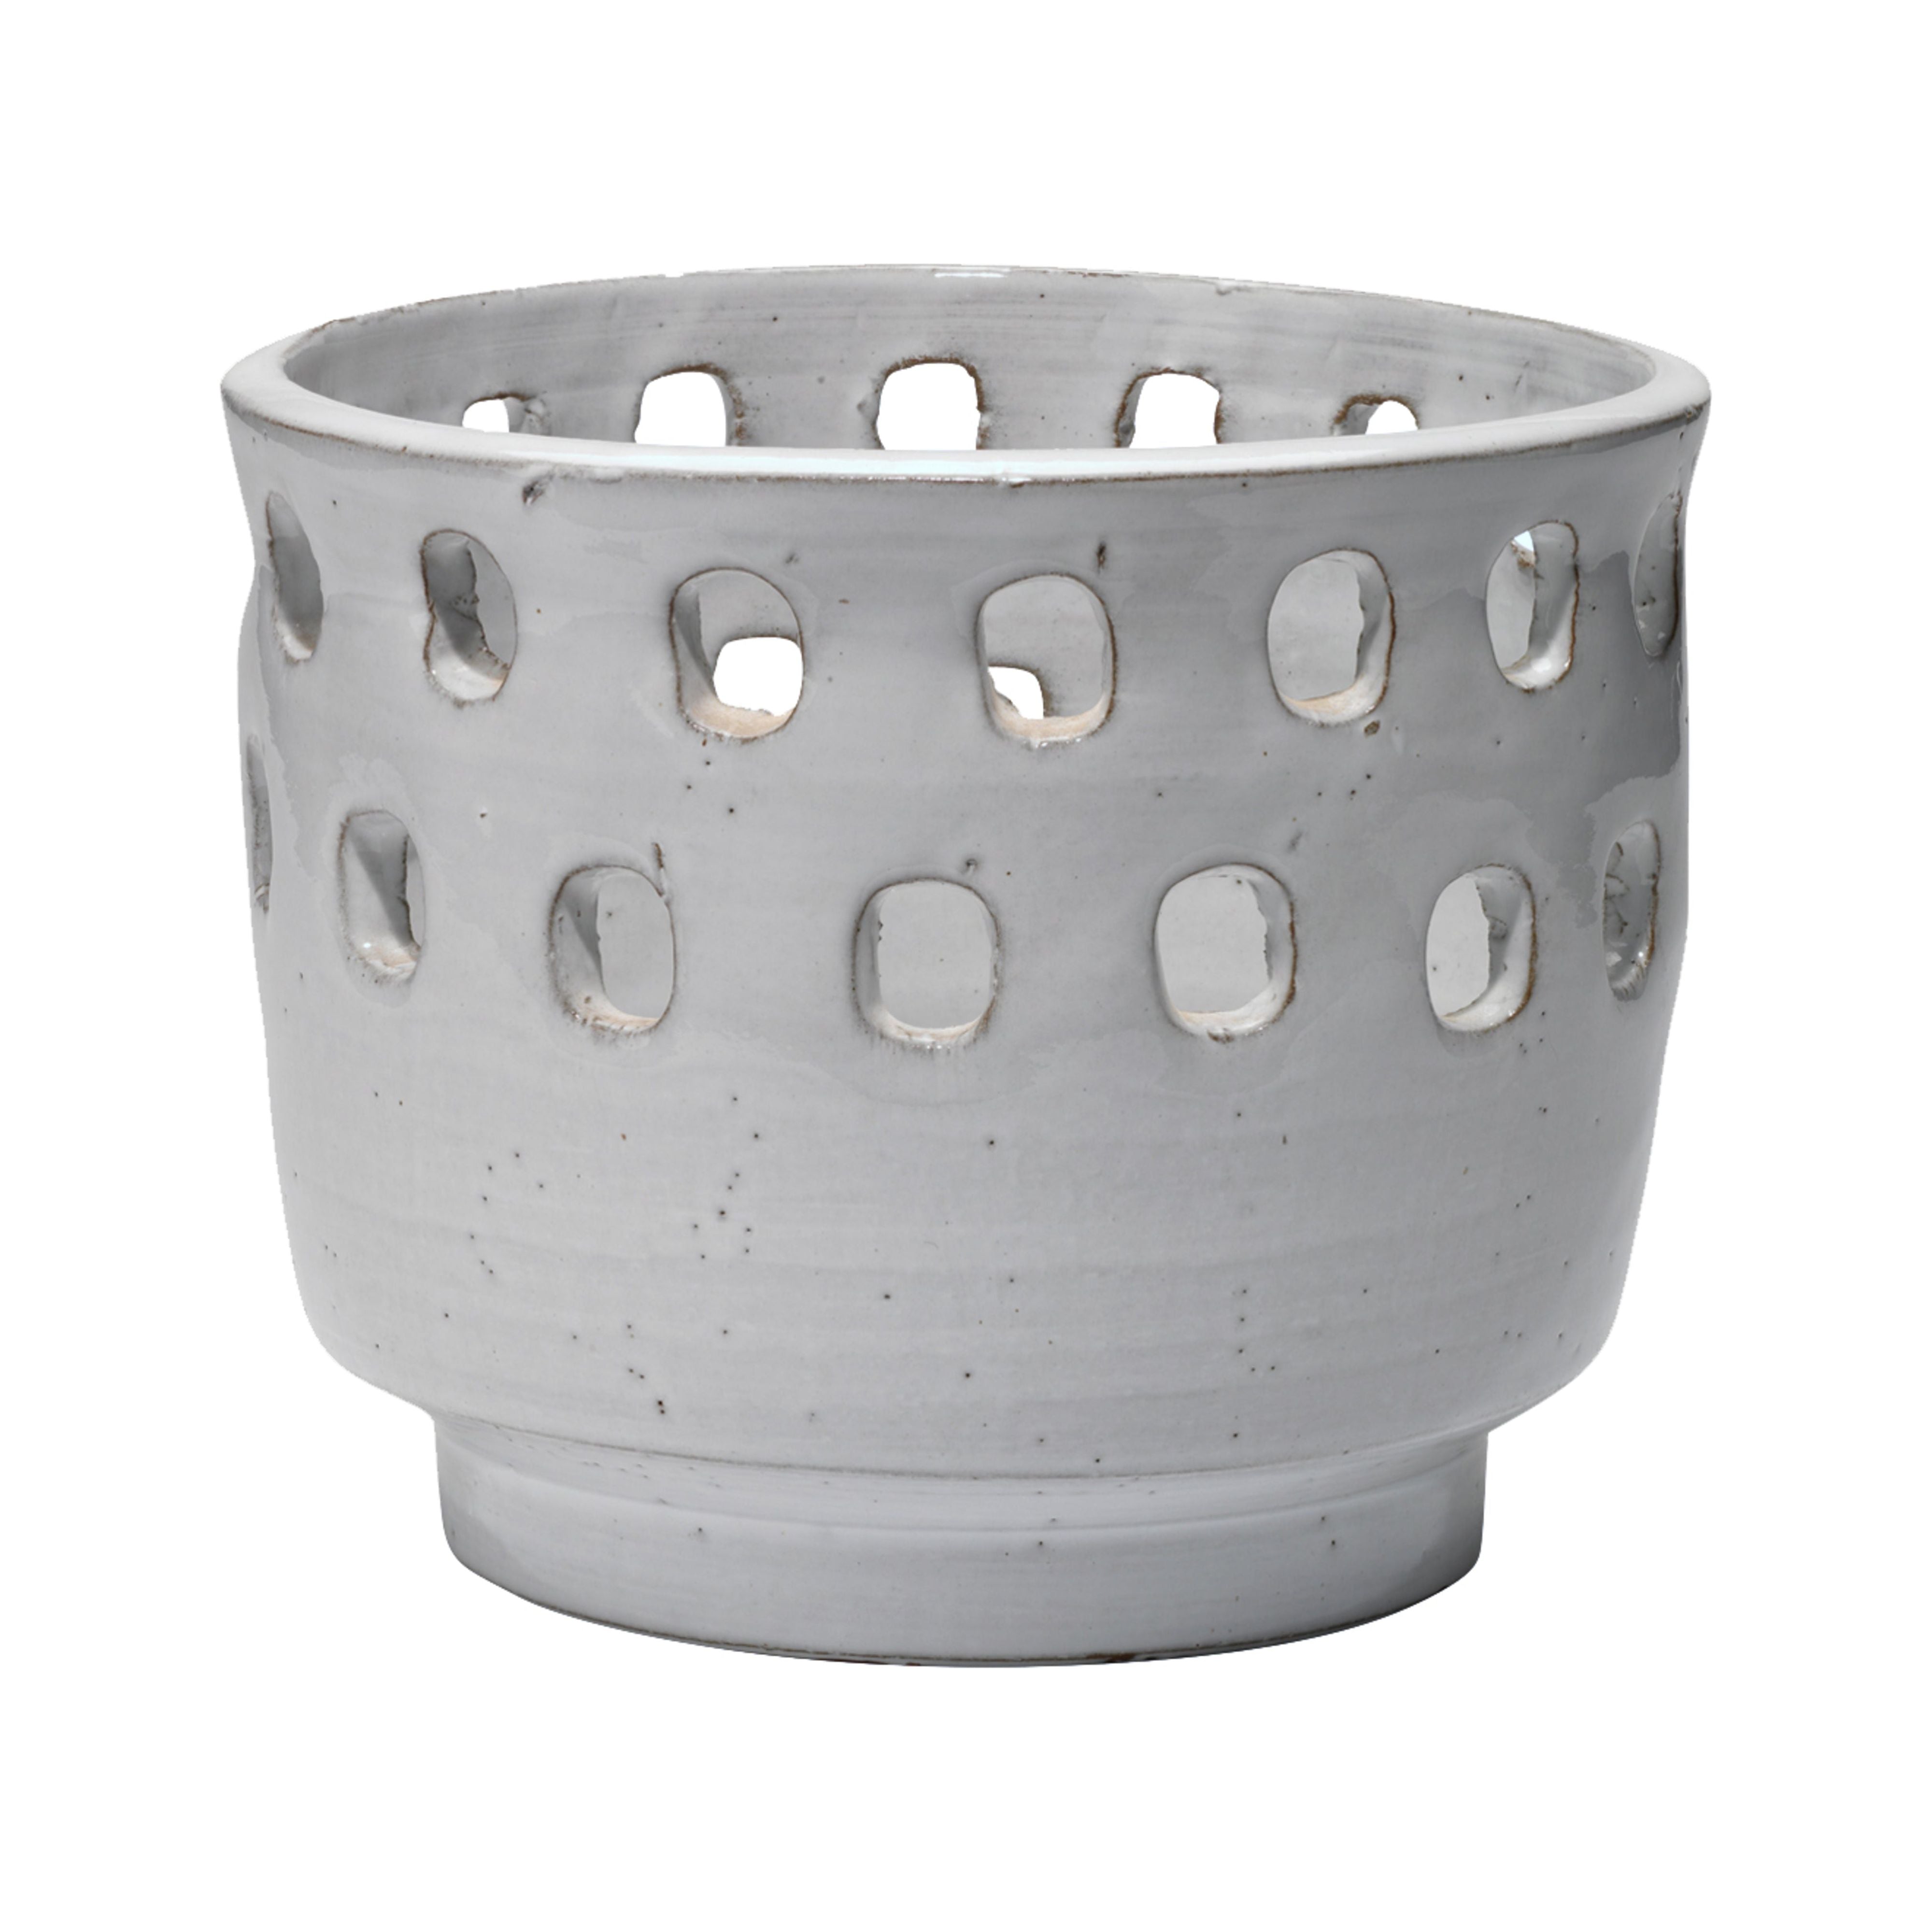 Jamie Young Company - 7PERF-LGWH - Perforated Pot - Perforated - White